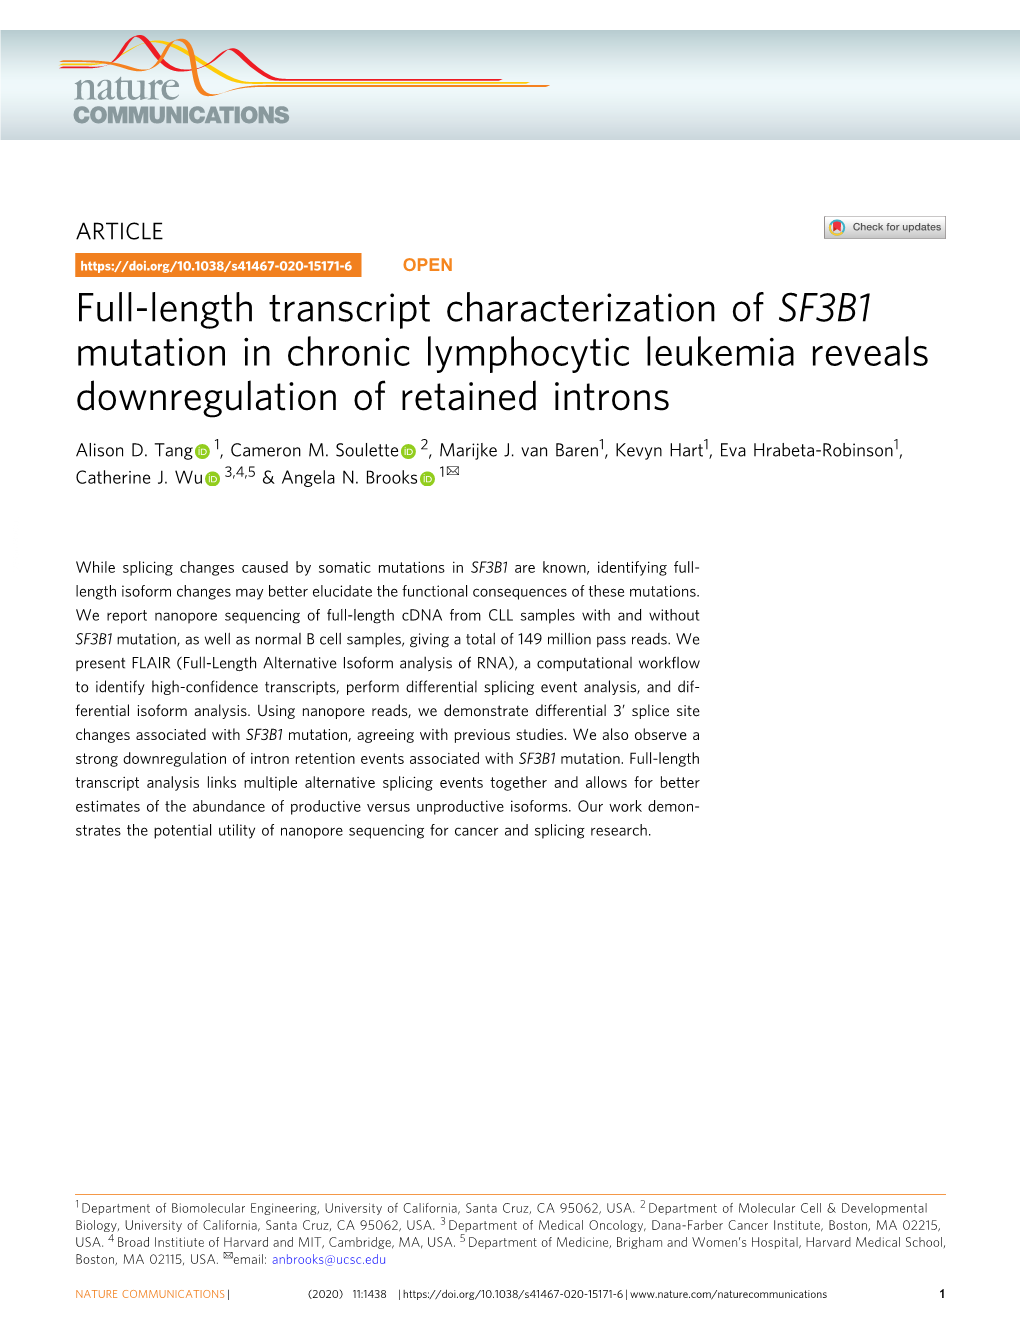 Full-Length Transcript Characterization of SF3B1 Mutation in Chronic Lymphocytic Leukemia Reveals Downregulation of Retained Introns